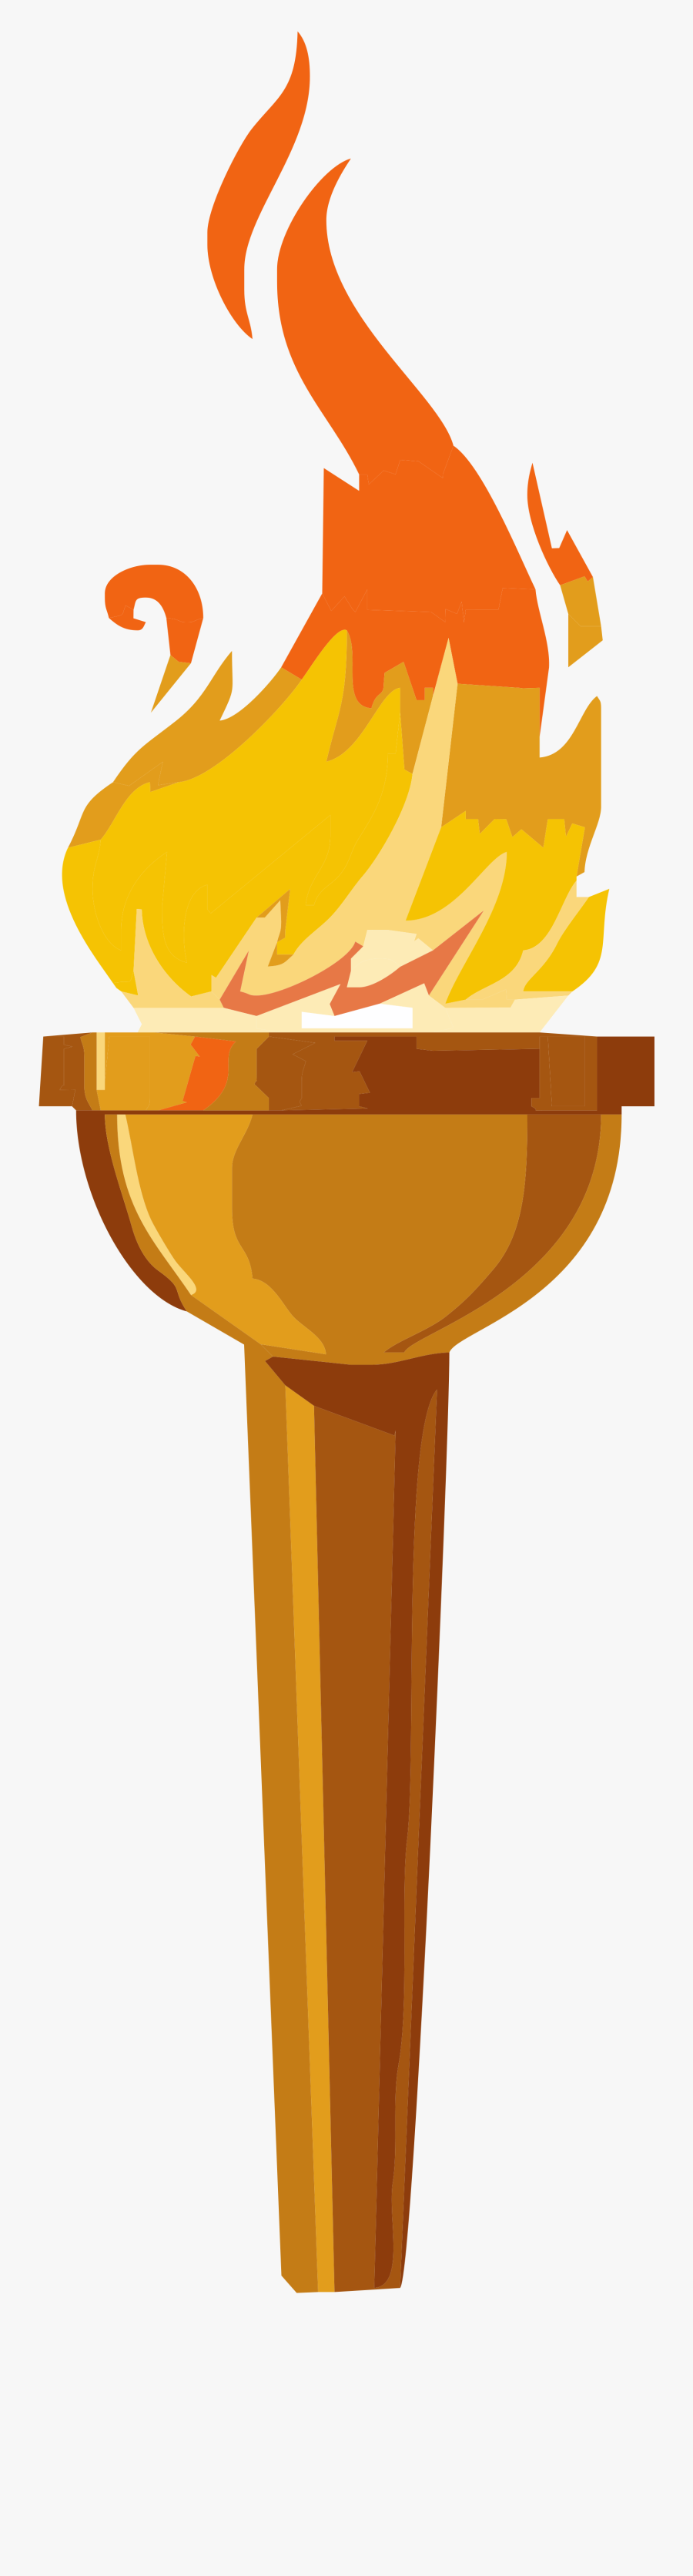 File - Torch - Svg - Wikimedia Commons - Torch Hd Png - Olympic Torch Clip Art, Transparent Clipart